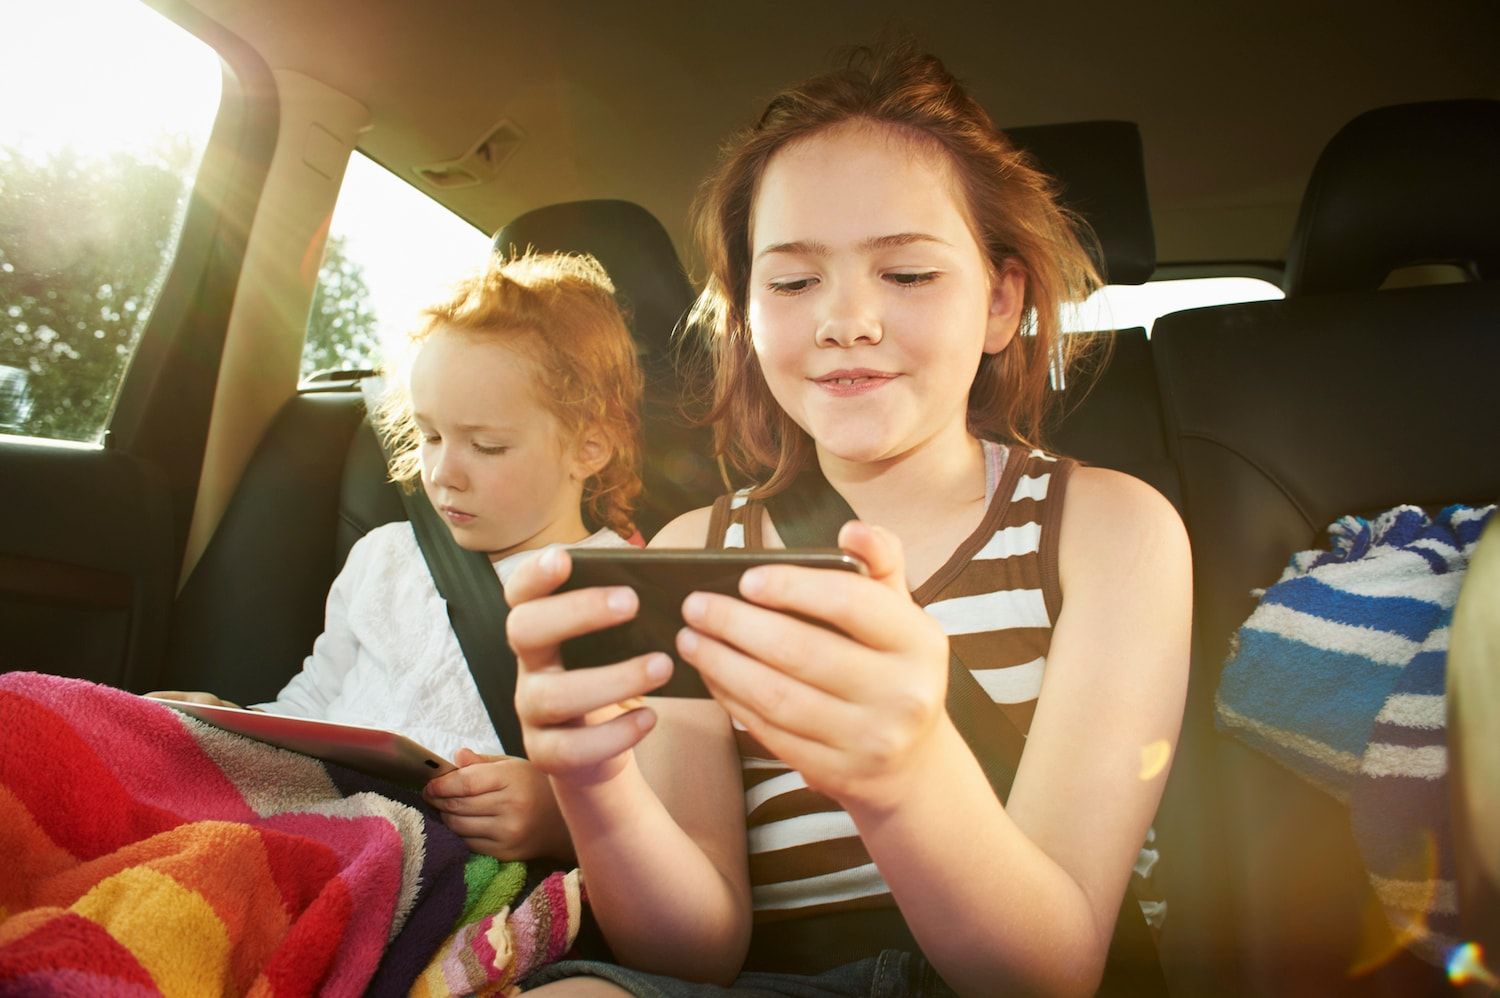 7 cell phone rules for kids that every parent should establish right now